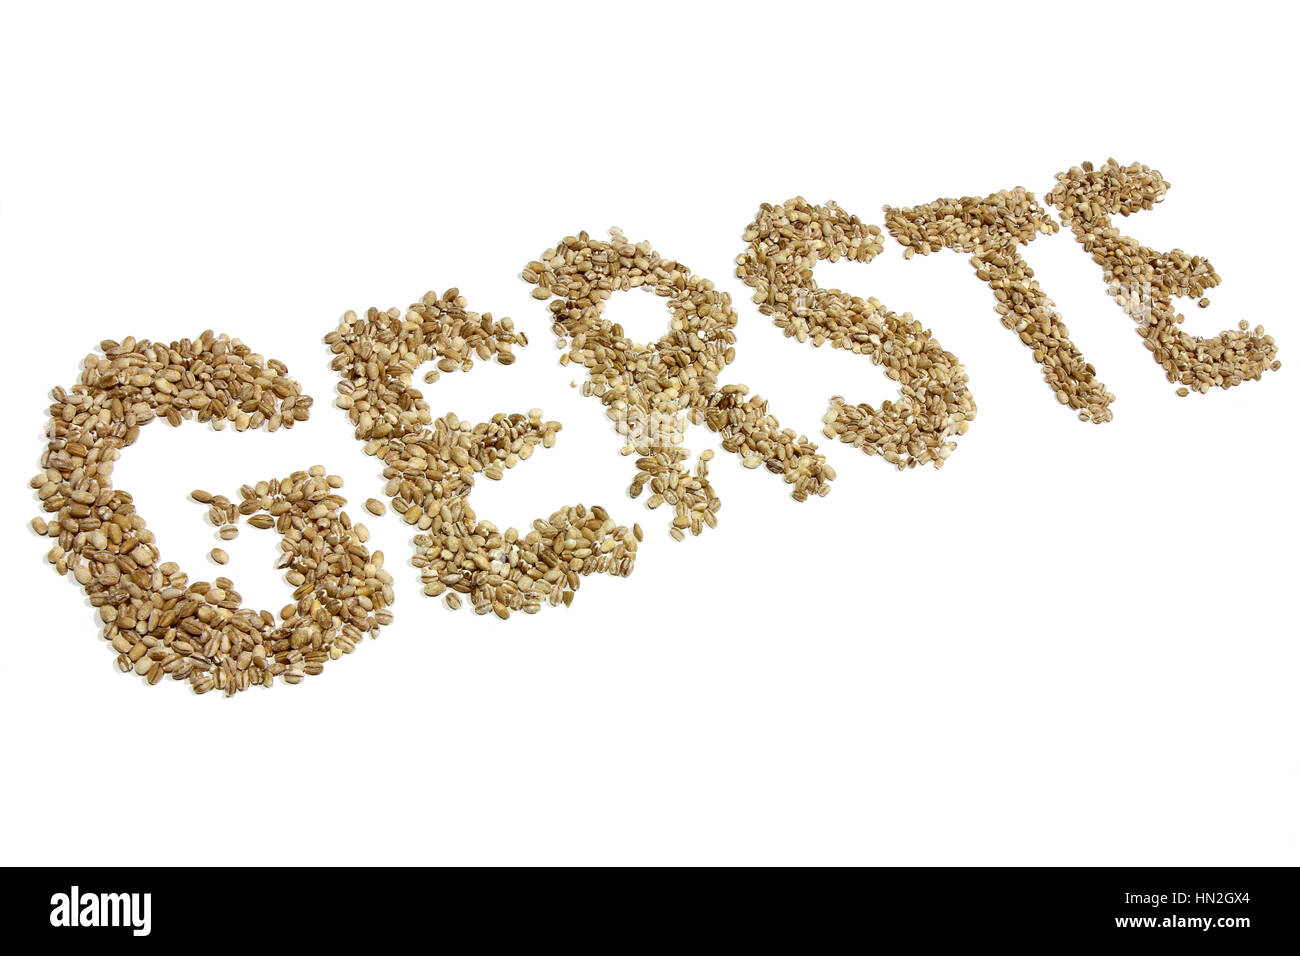 GERSTE (barley in German language) written with barley grains isolated on white background Stock Photo